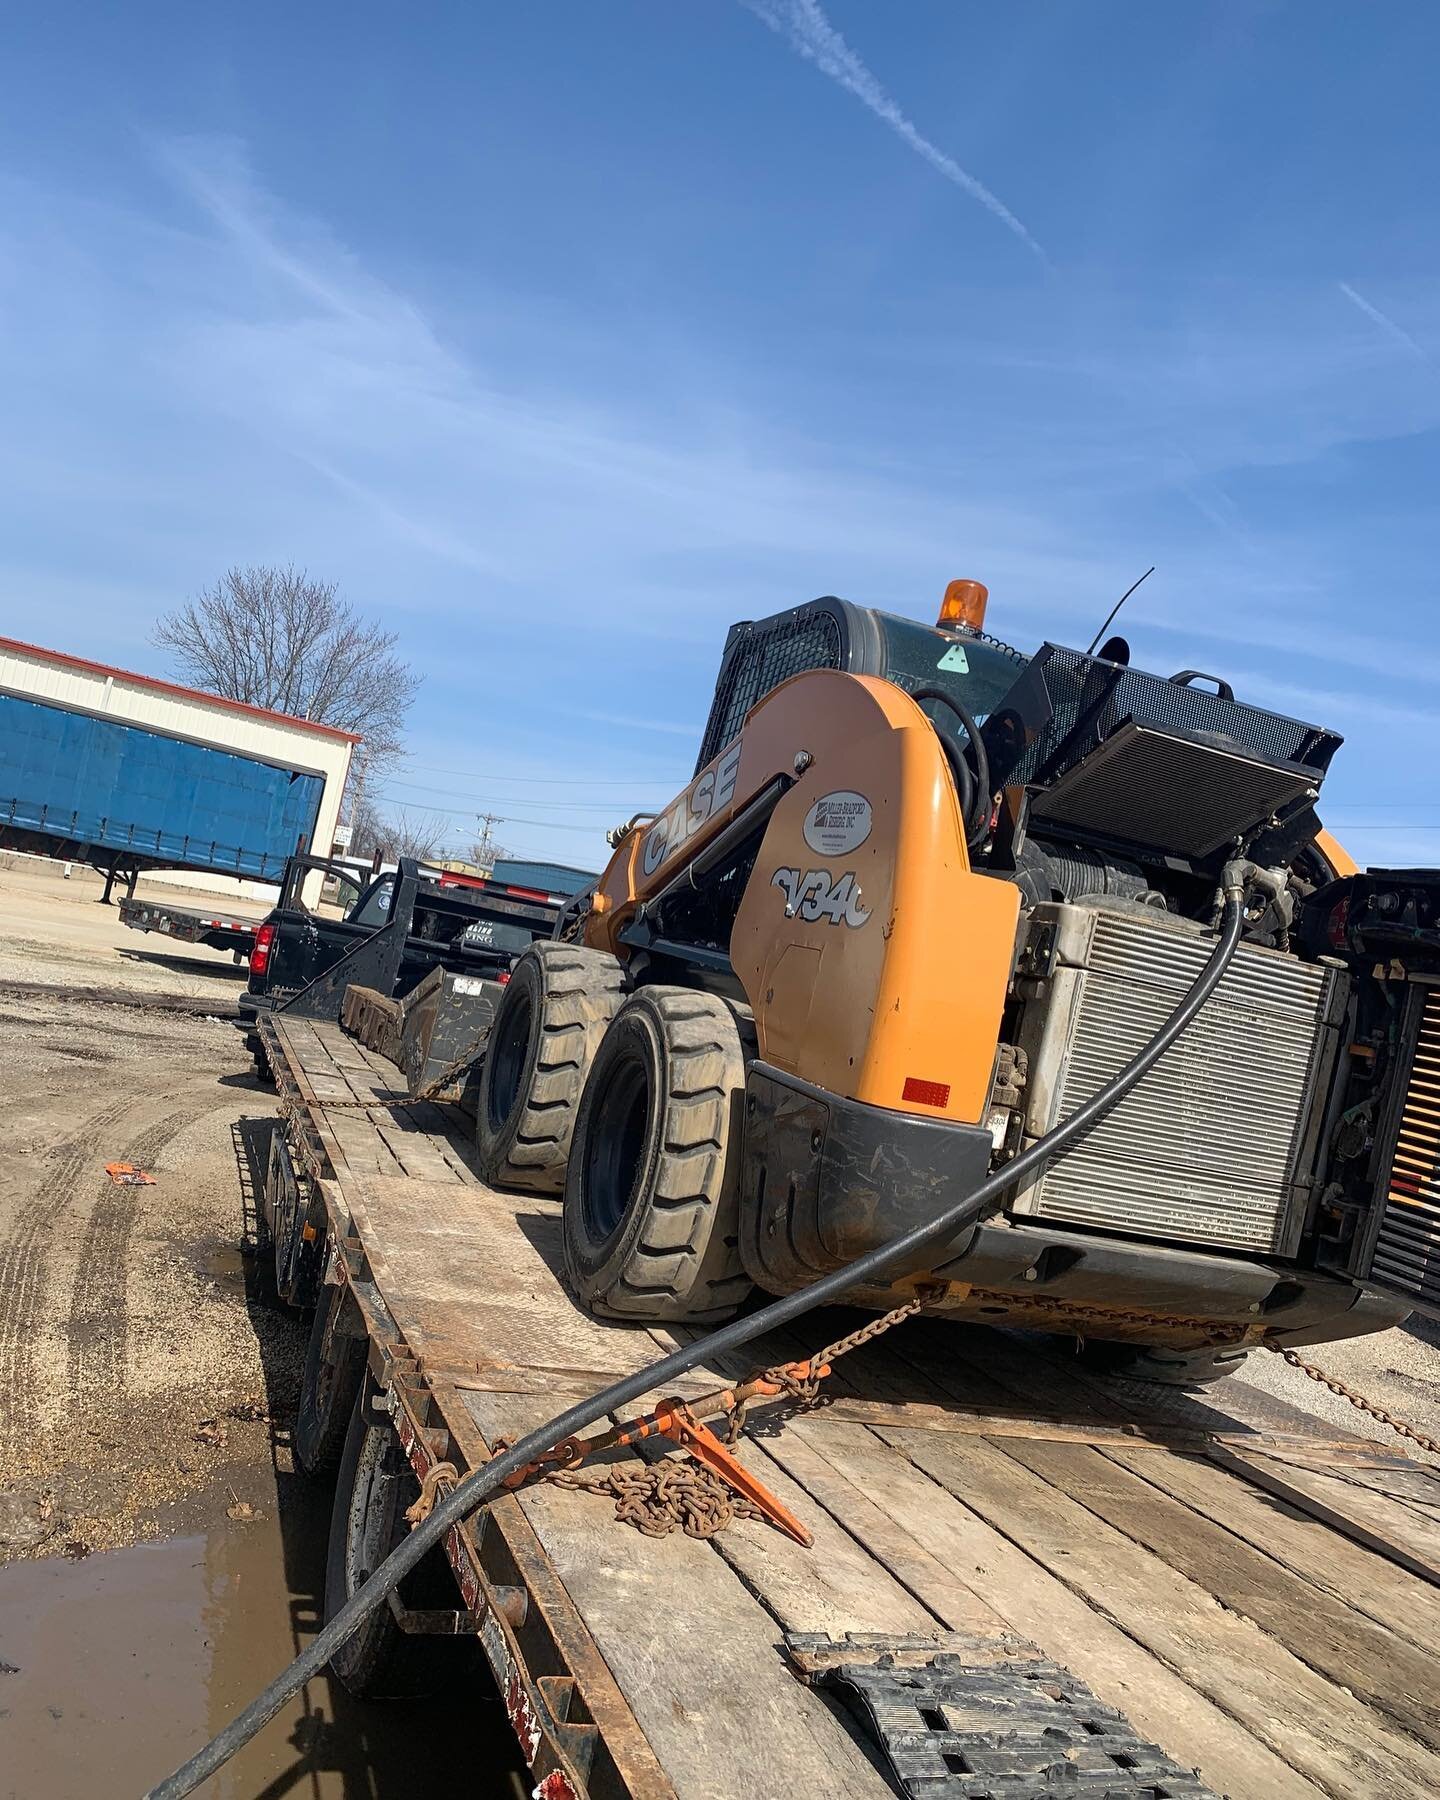 Ready to #rollout to another Porter Brothers project! #bigiron only. 😉
⁠⁠
What are you working on today?⁠⁠
⁠⁠
⁠⁠
⁠⁠
#asphalt #asphaltlife #bluecollar #officeview #porterbrothersproud #thirdgeneration #construction #blackgold #nextgeneration #dirtyha